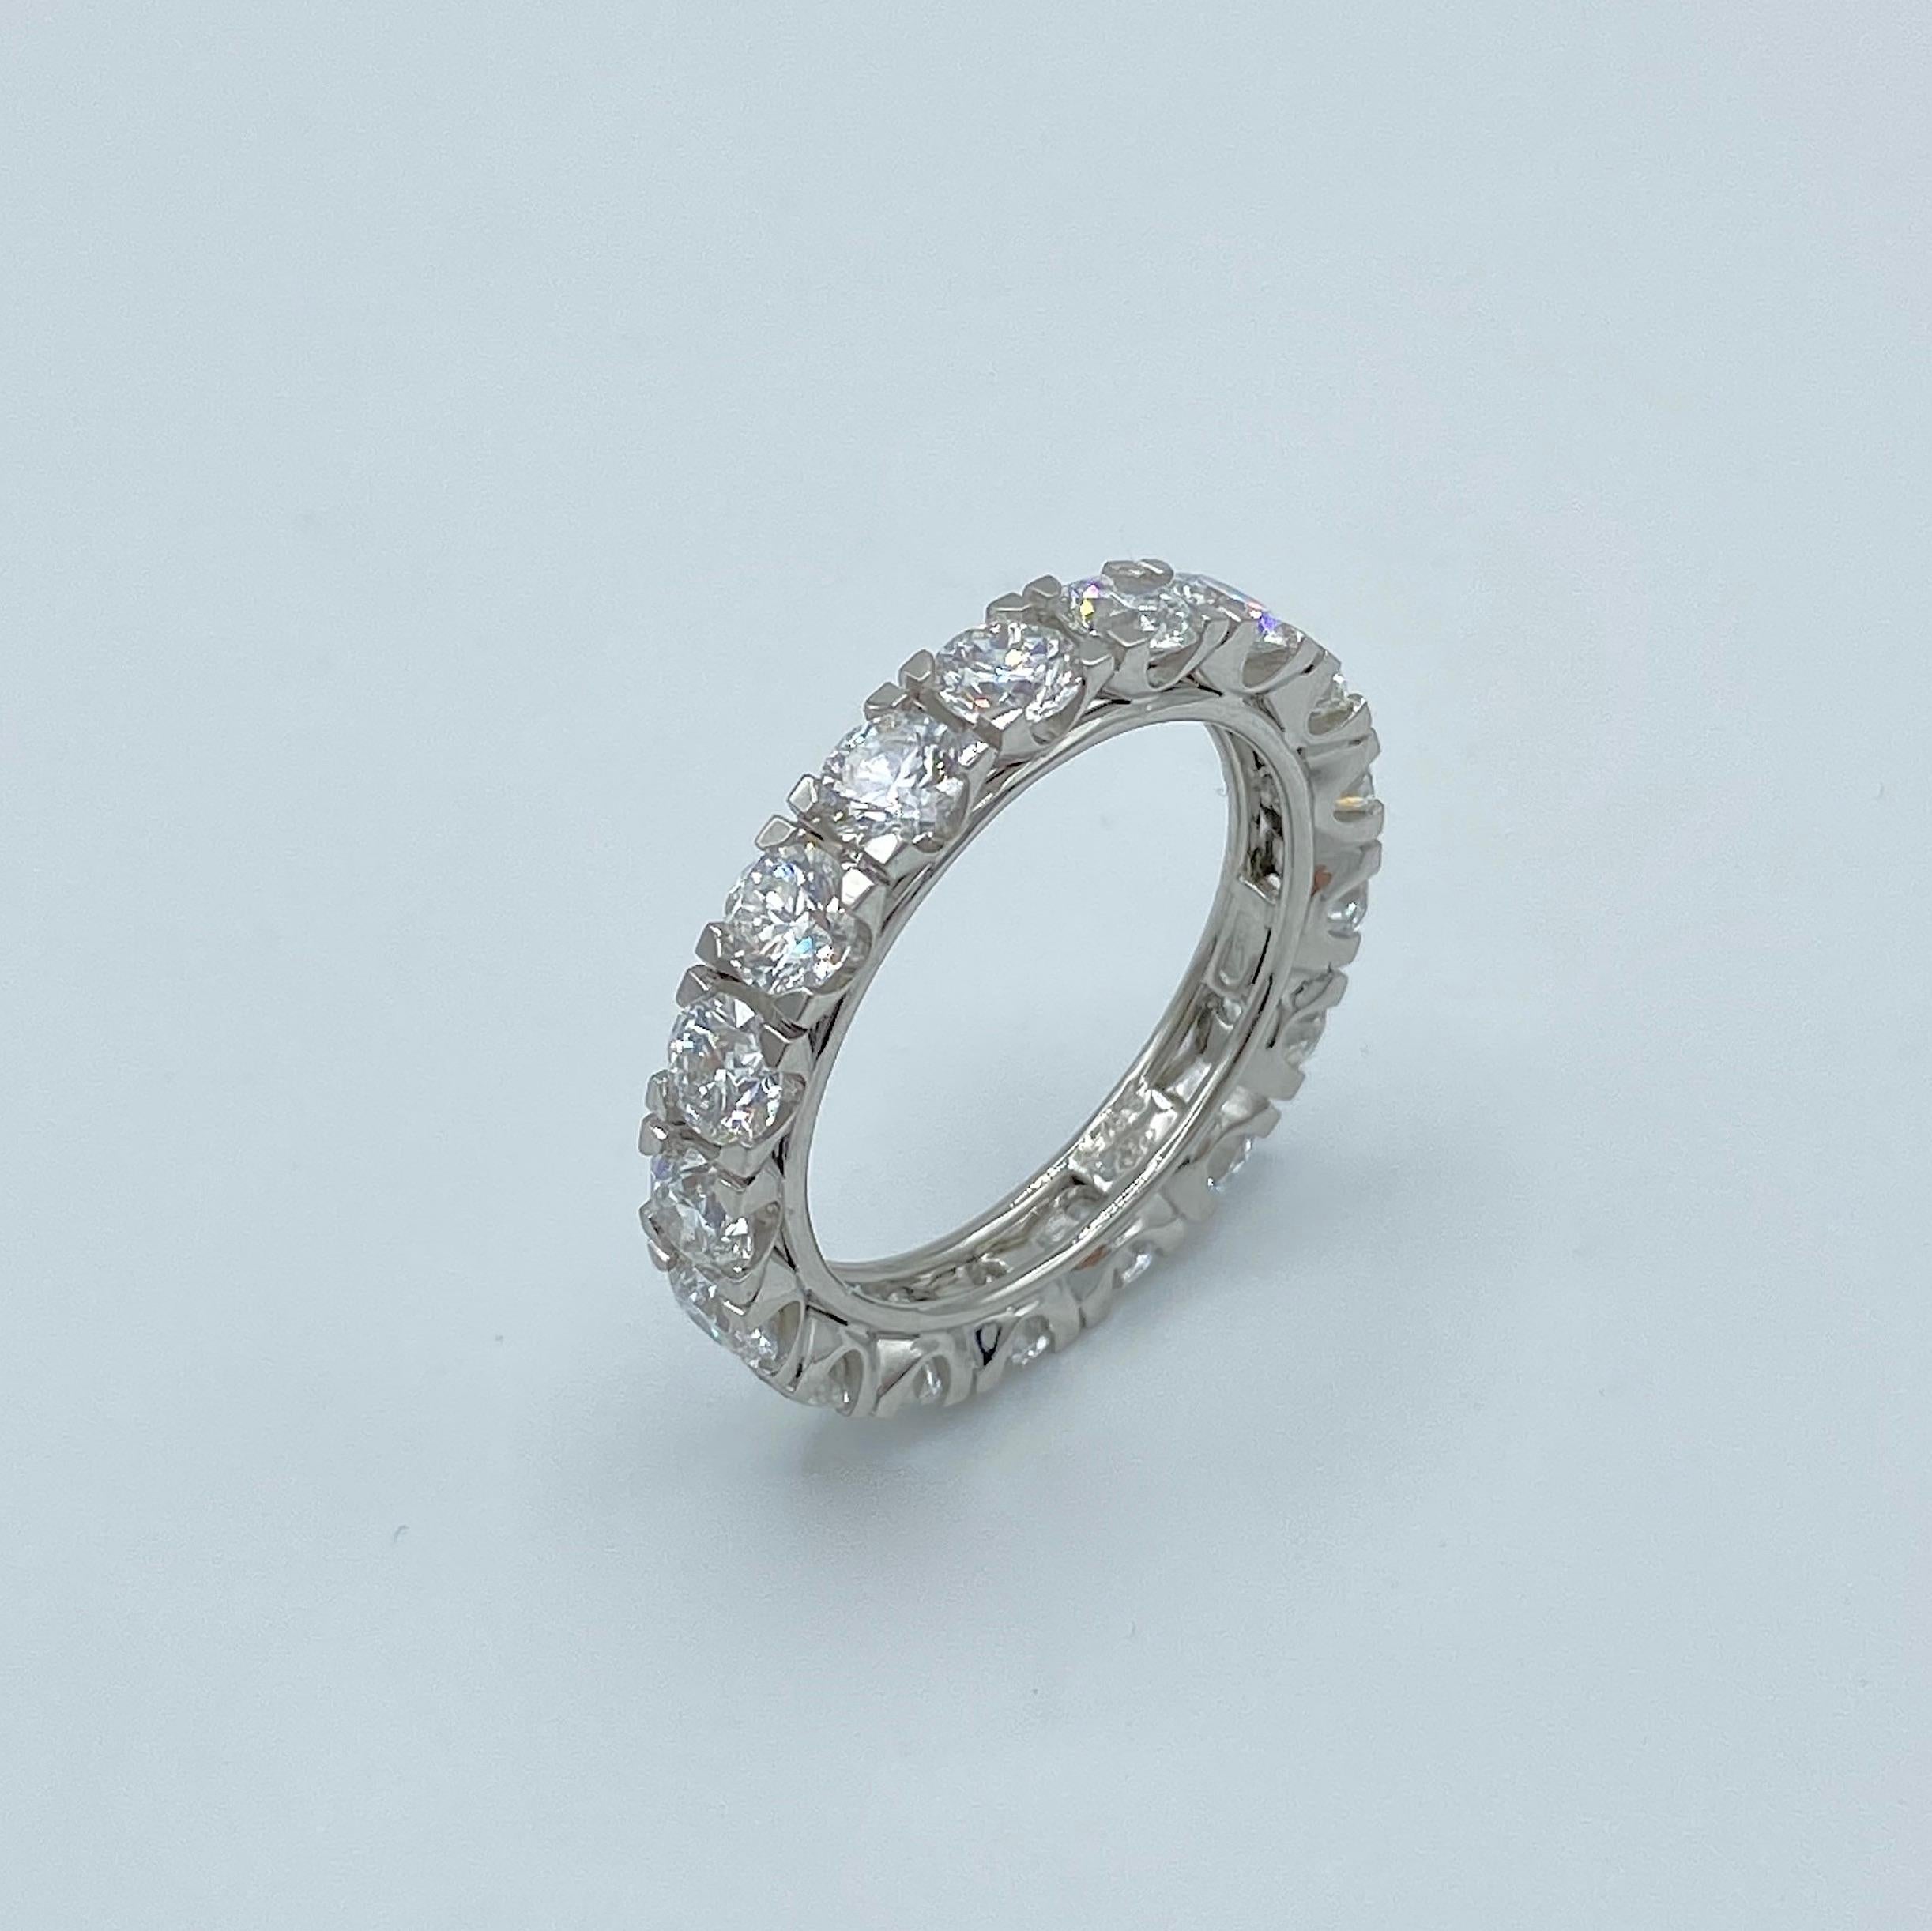 Engagement 3.00 Carat White Diamond Platinum Band Eternity Ring Made in Italy In New Condition For Sale In Bussolengo, Verona